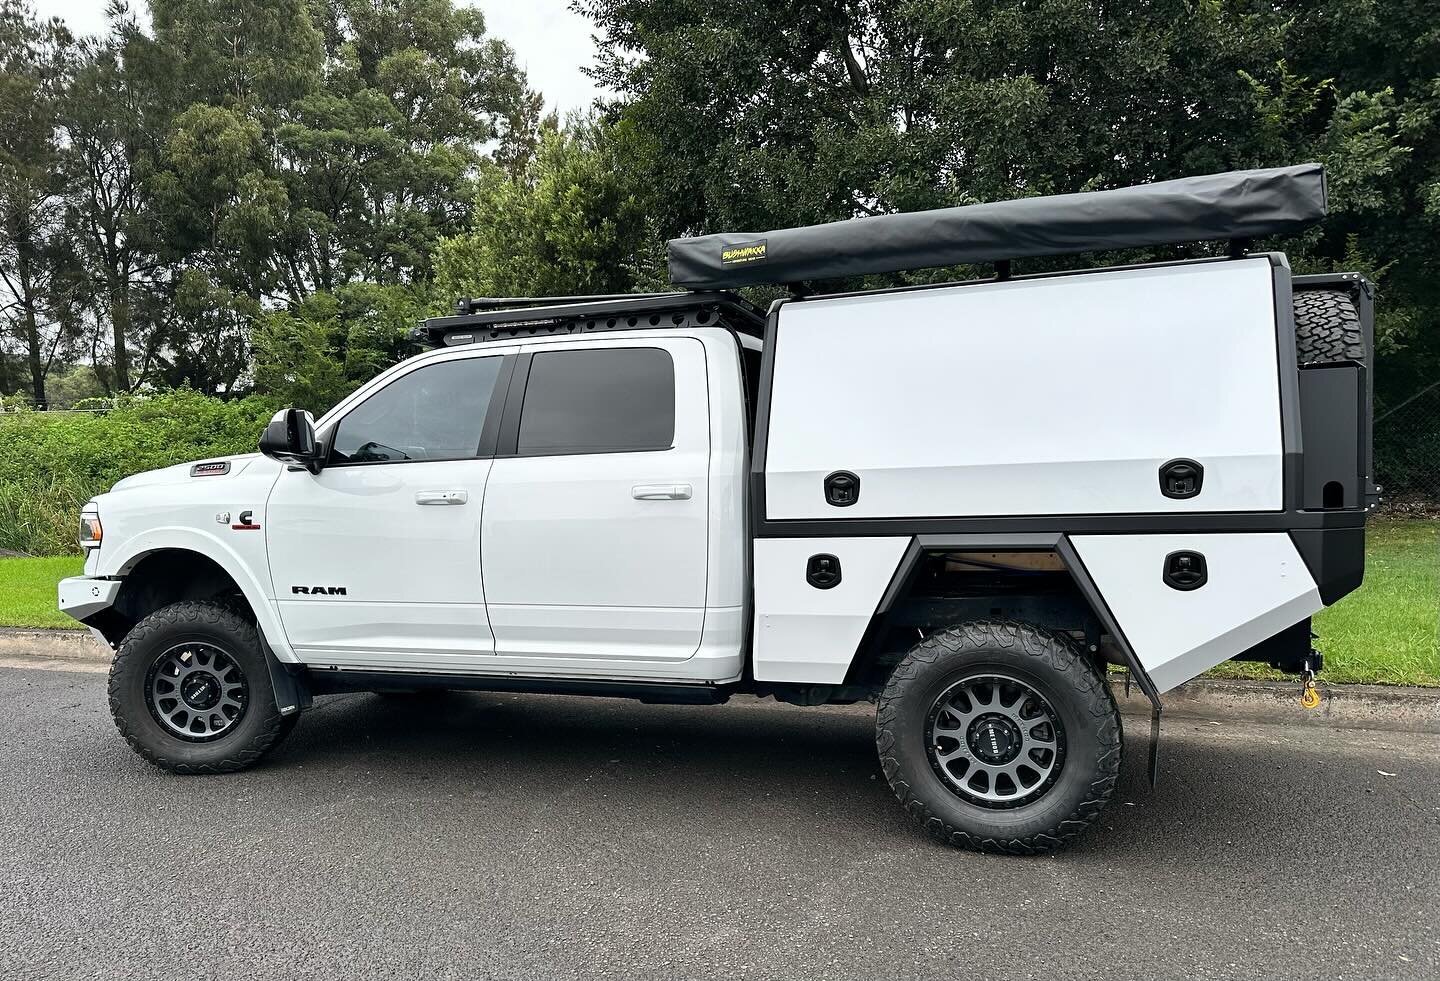 🚨RAM 2500 in detail&hellip;

FEATURING
-Chassis mount canopy body
-Under tray toolboxes 
-Flared Mudguards 
-Sealed trundle drawer
-Sensor relocation 
-Lockable Jerry can holder
-Pro eagle 4x4 jack storage box 
-Fold down ladder
-Spare wheel cradle 